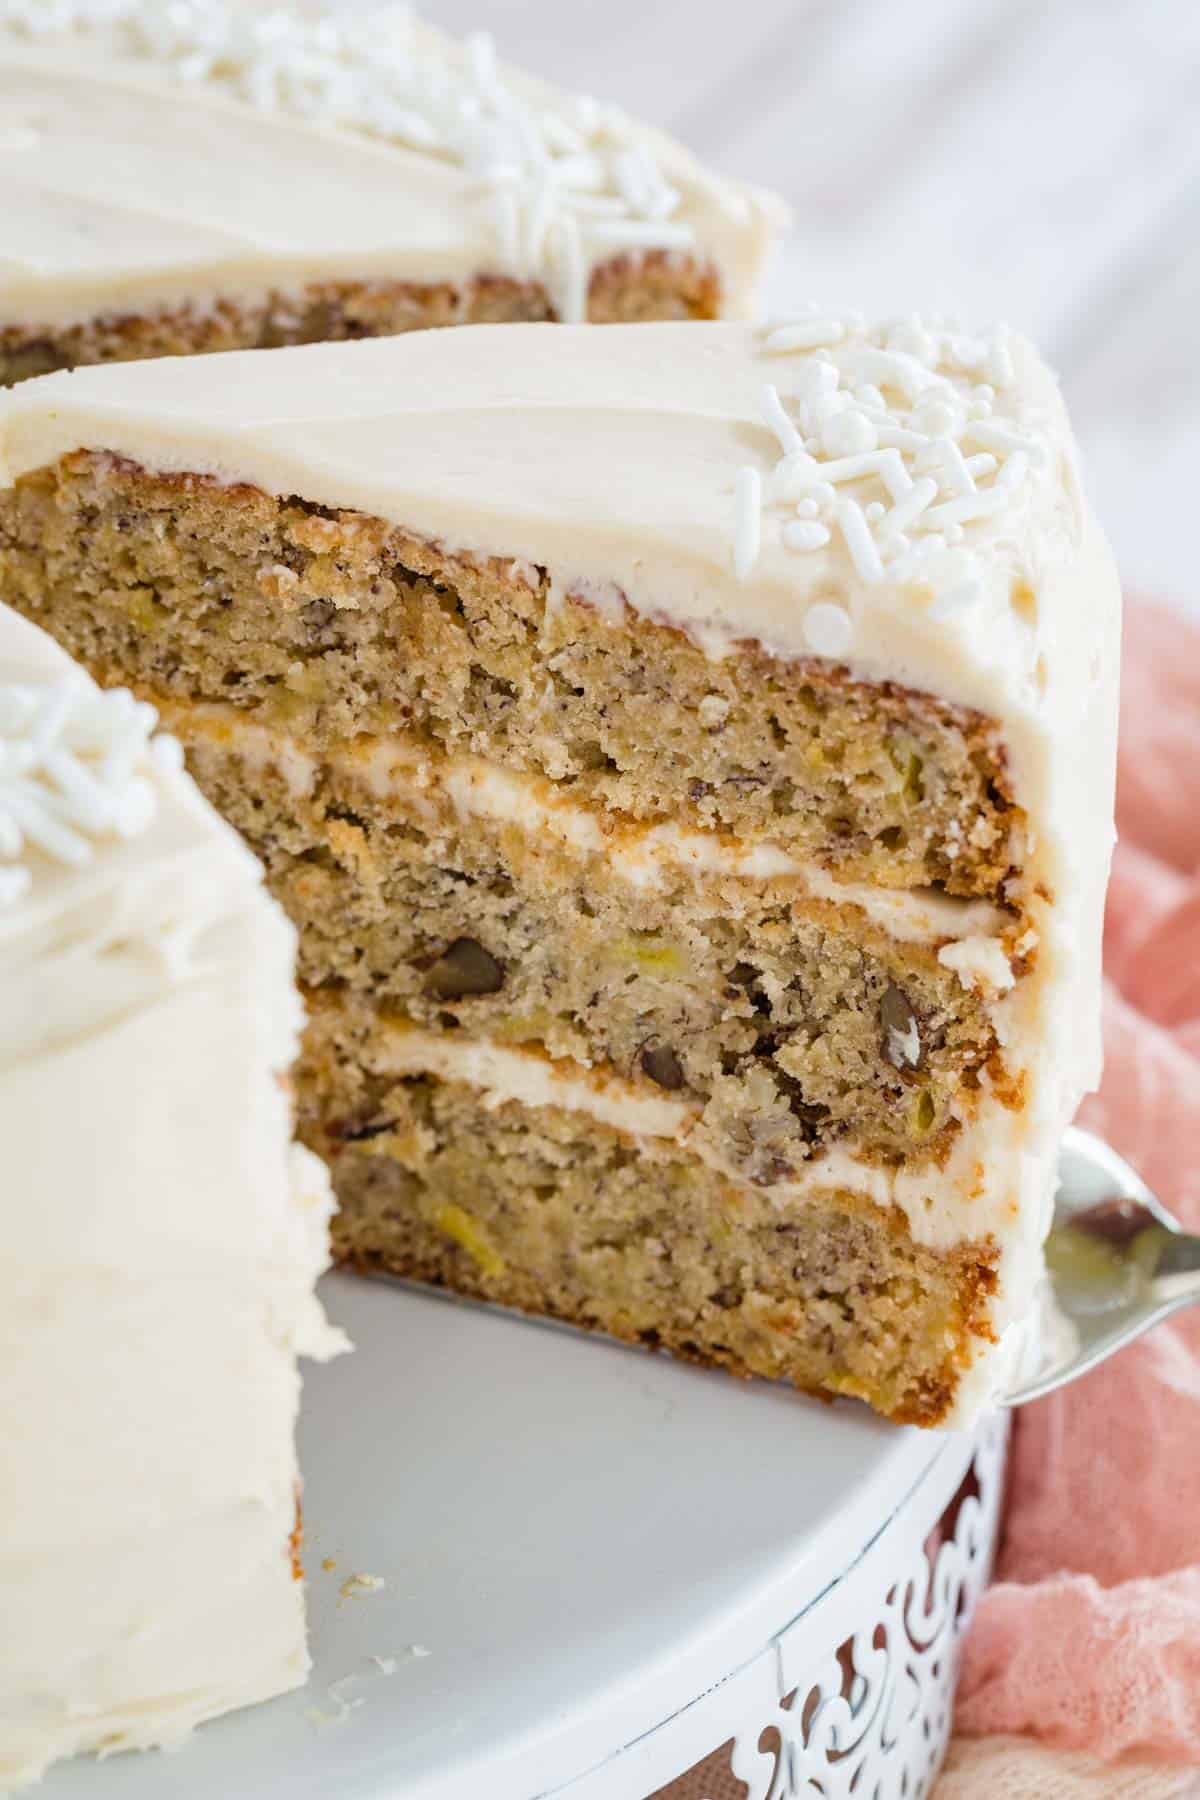 A slice of gluten free hummingbird cake is lifted from the rest of the cake.